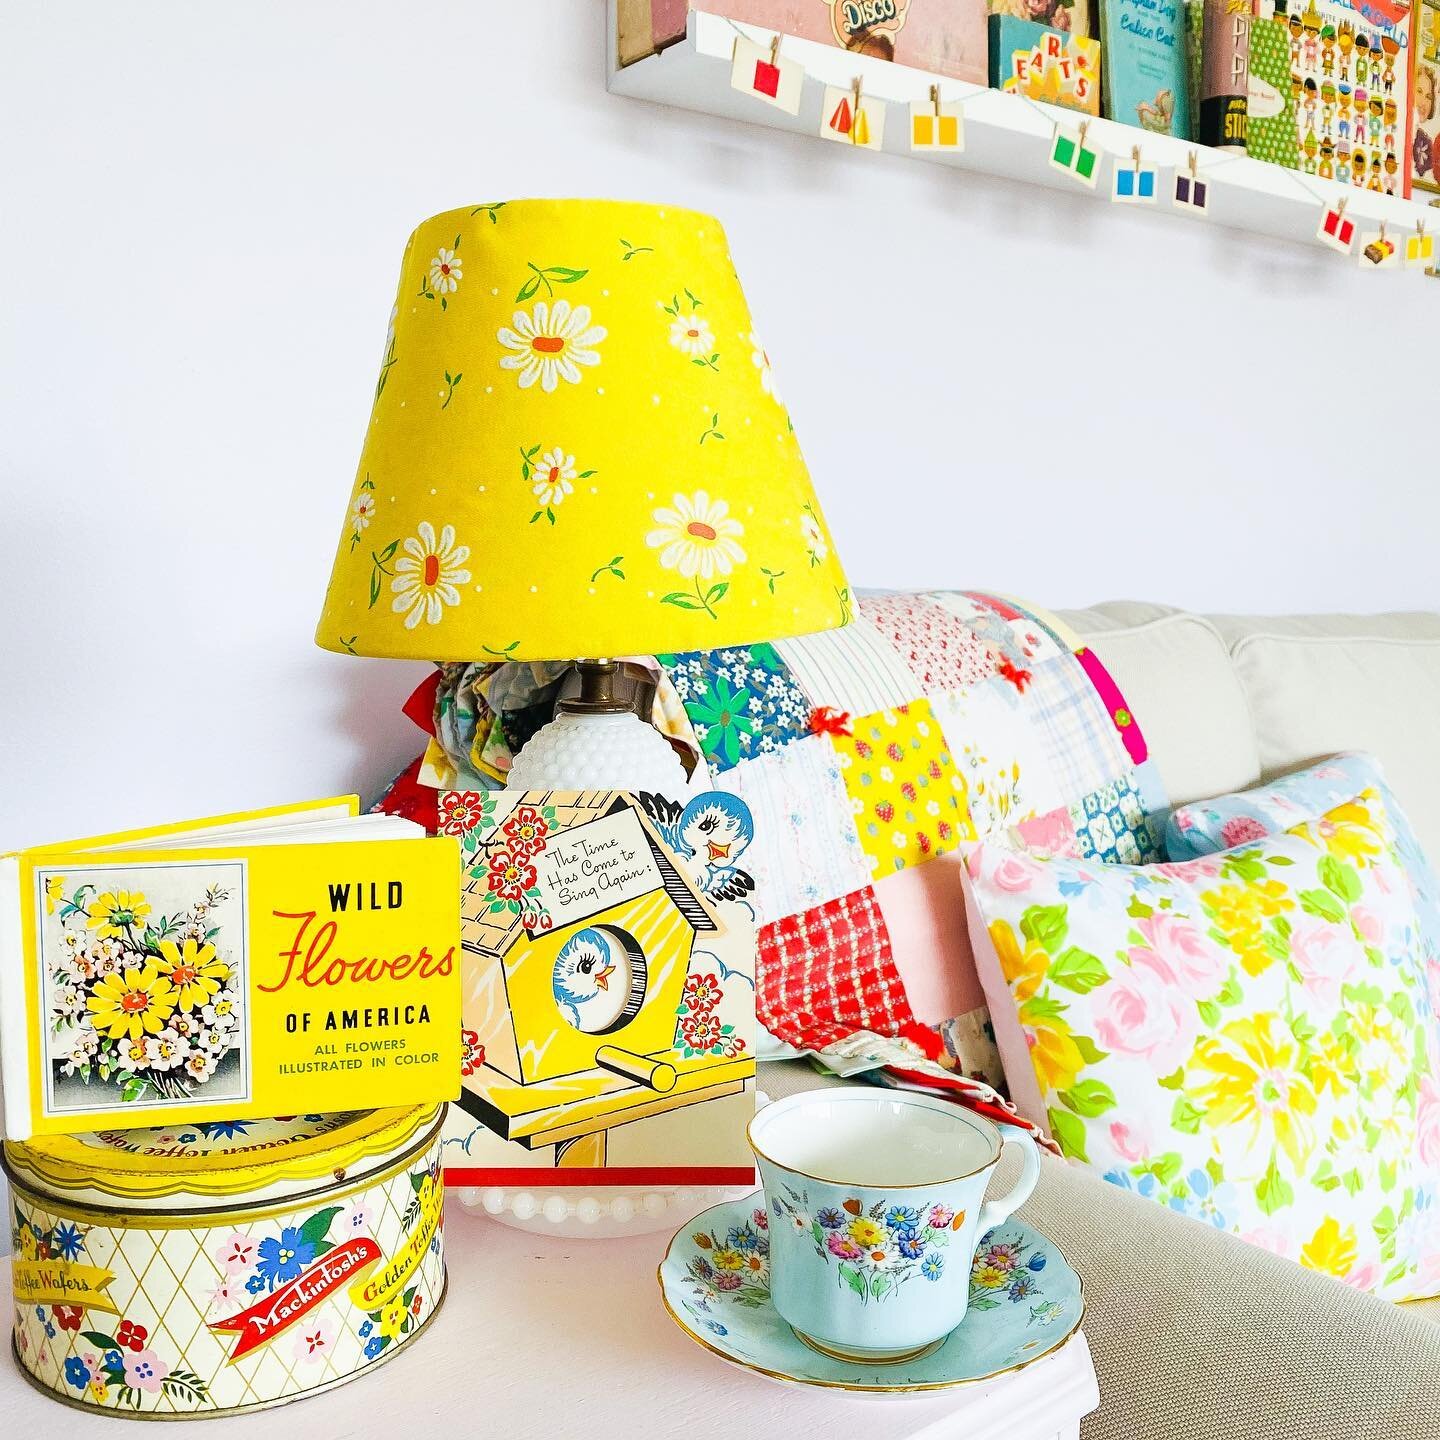 I did my lampshade makeover a few weeks ago and I&rsquo;m even more in love with them! Every time I walk in my living room the pop of yellow makes me smile ☀️ I have a new blog post today with the step by step of how I recovered my lampshades. I hope